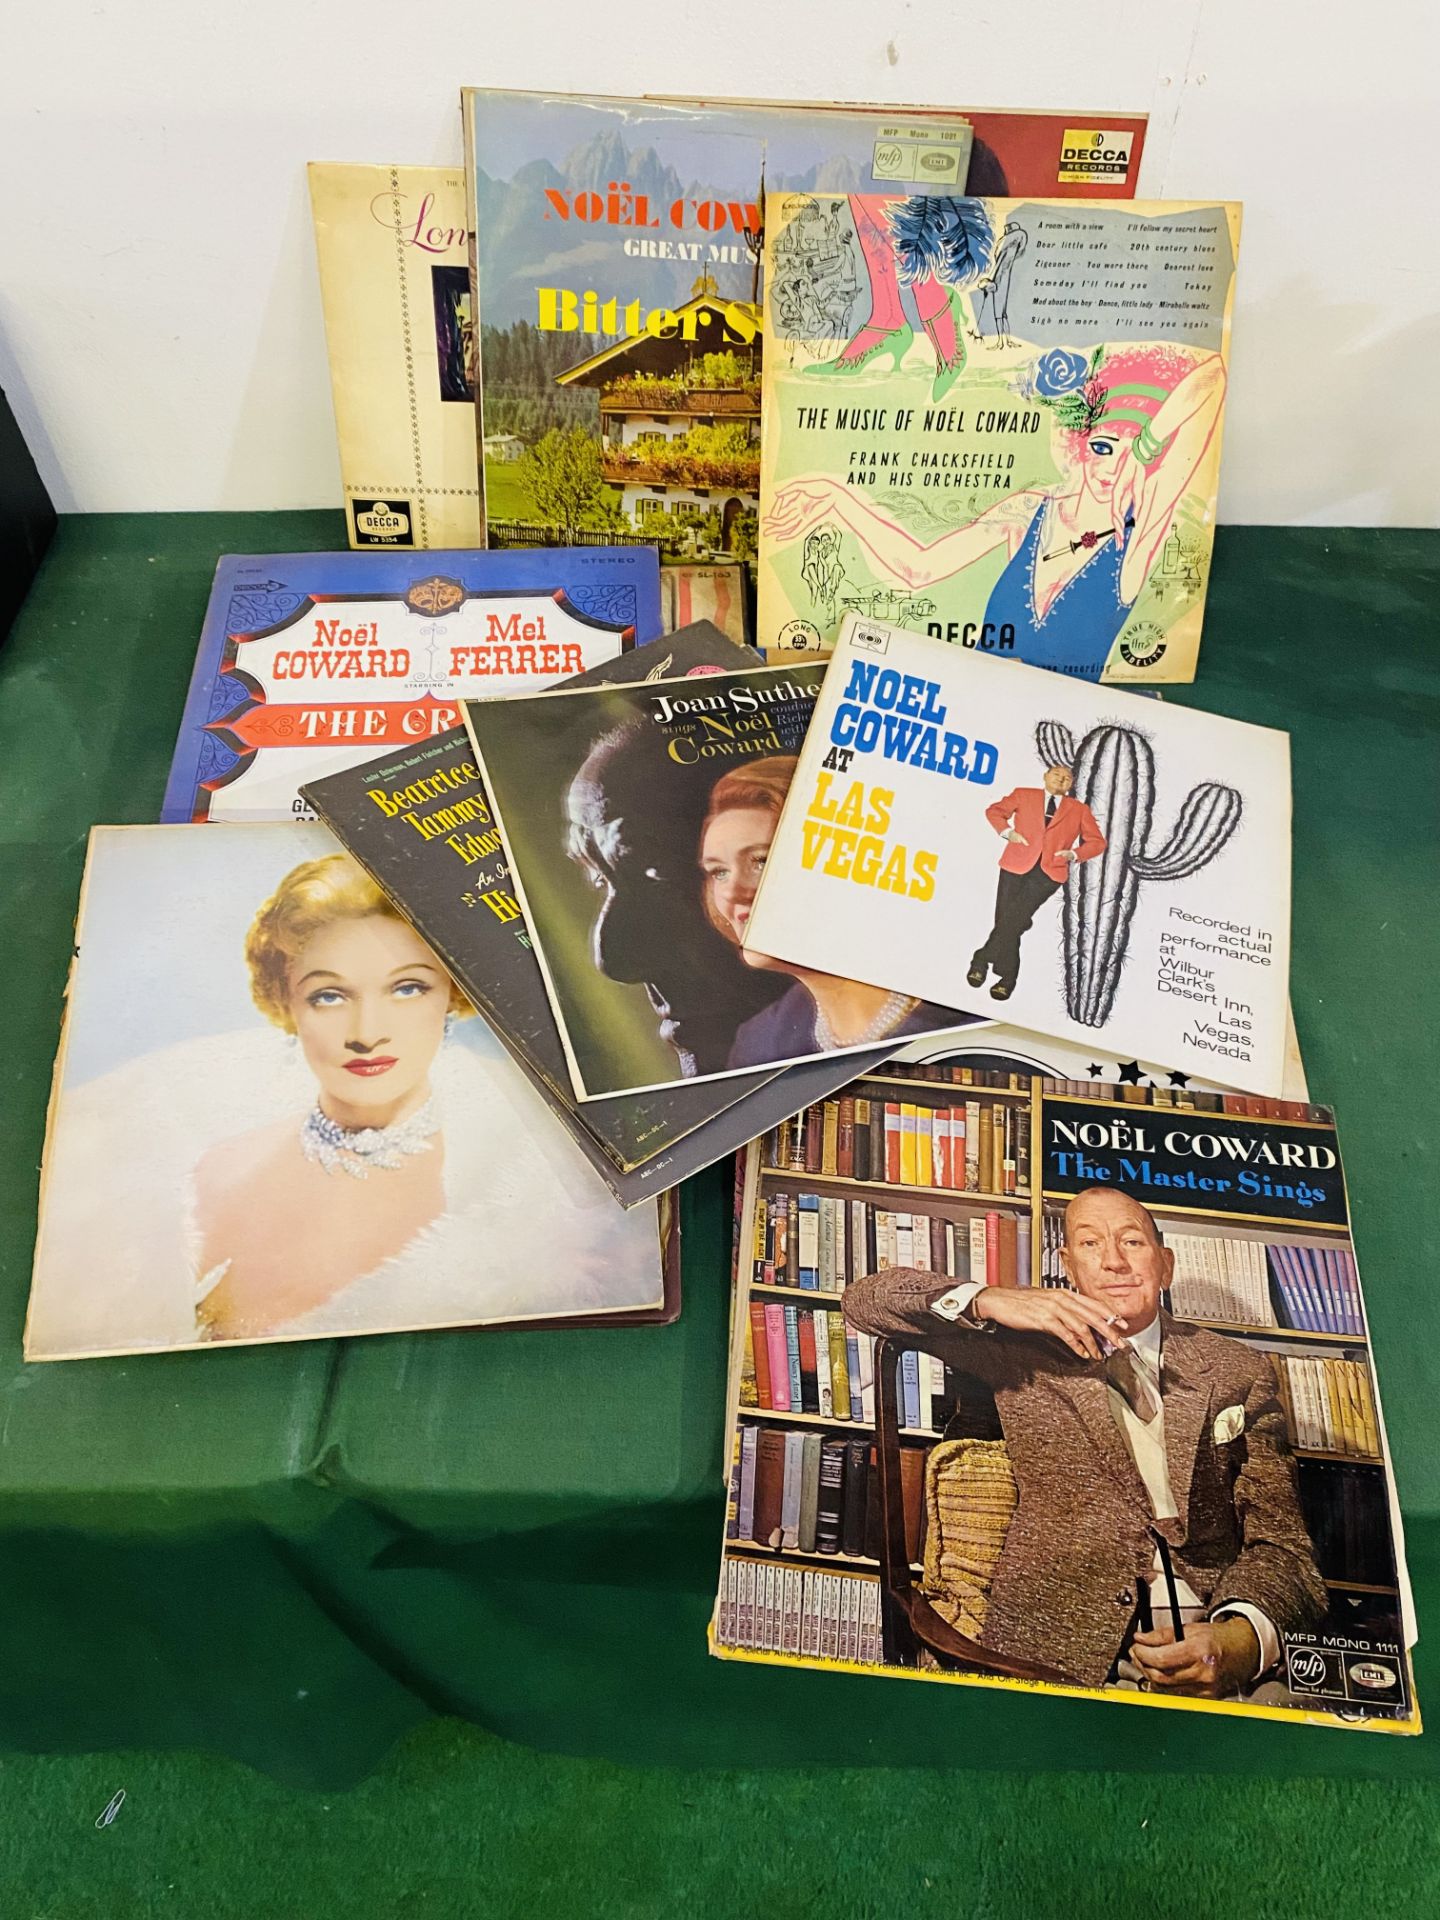 Quantity of records and 78's relating to Noel Coward - Image 2 of 3